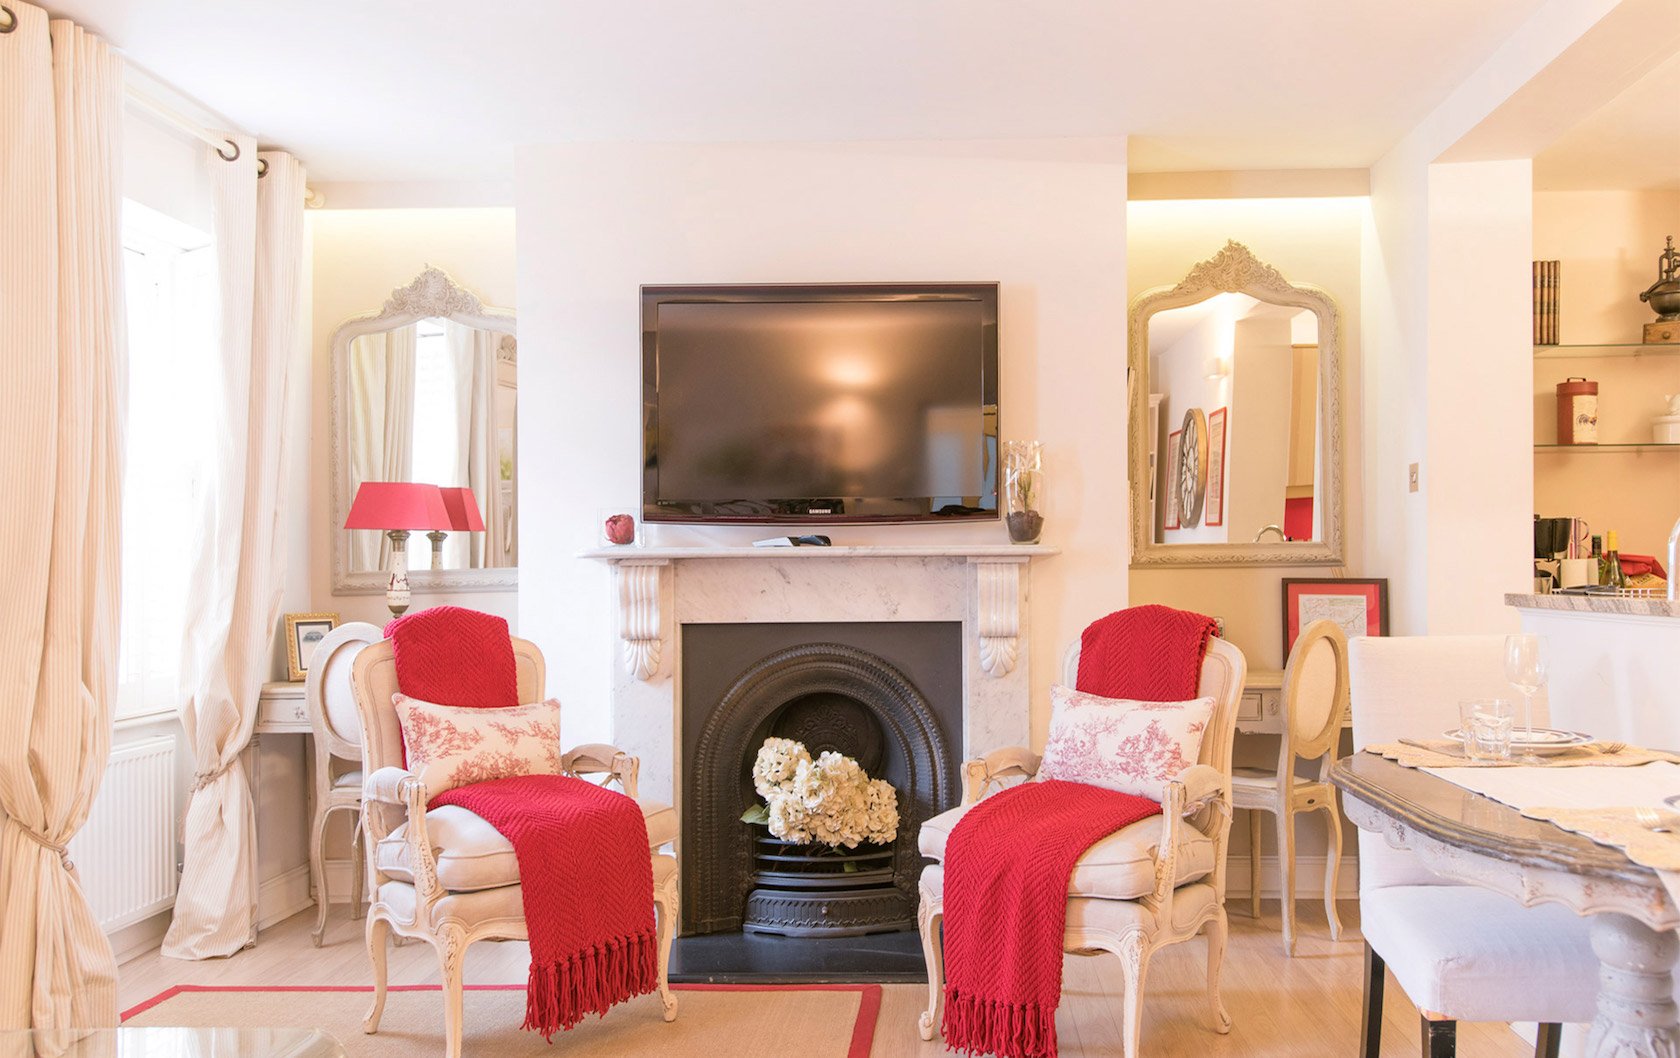 London apartments with fireplaces by London Perfect